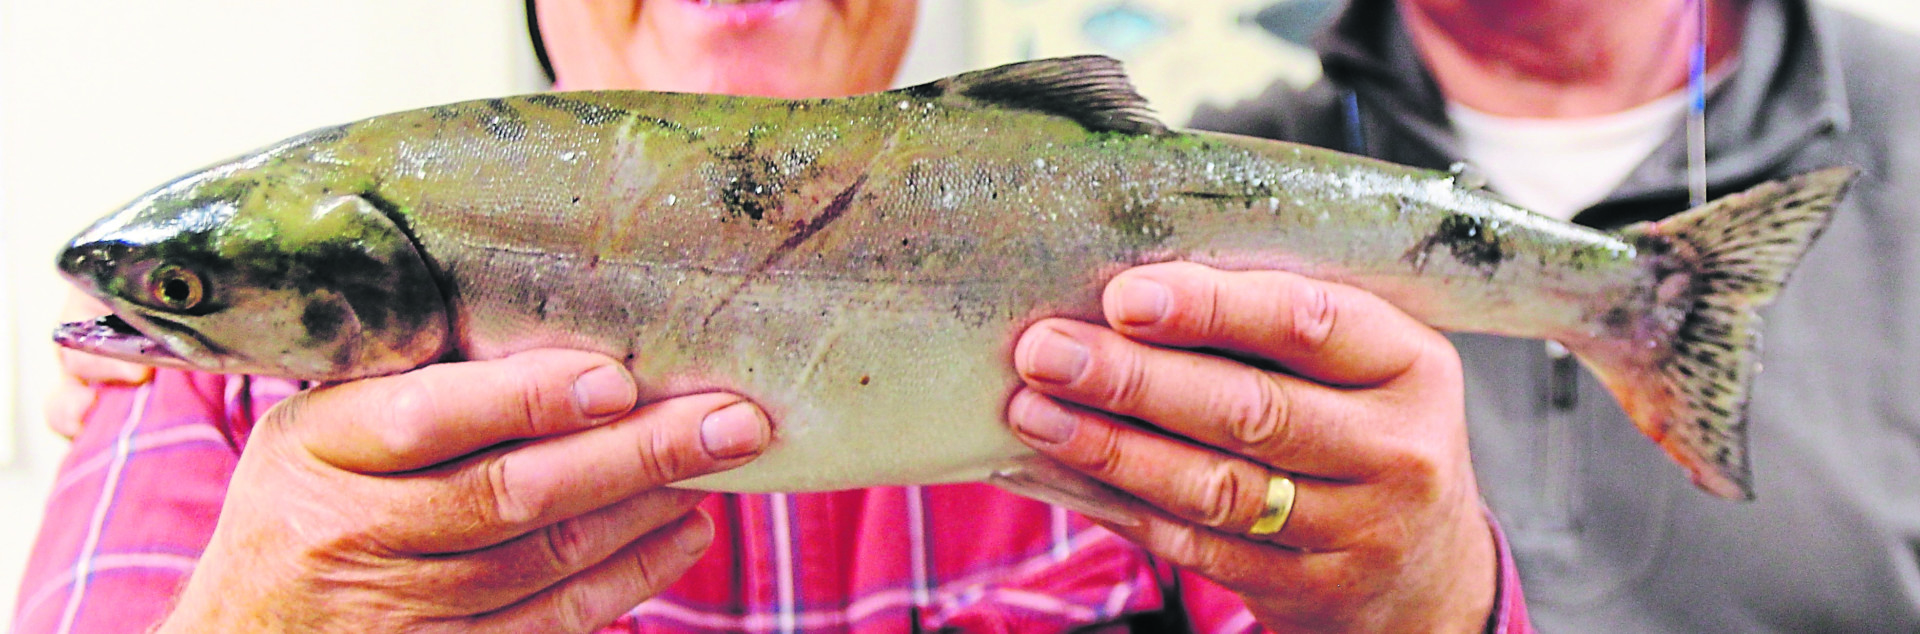 Anglers on Tyrone rivers urged to report pink salmon catches